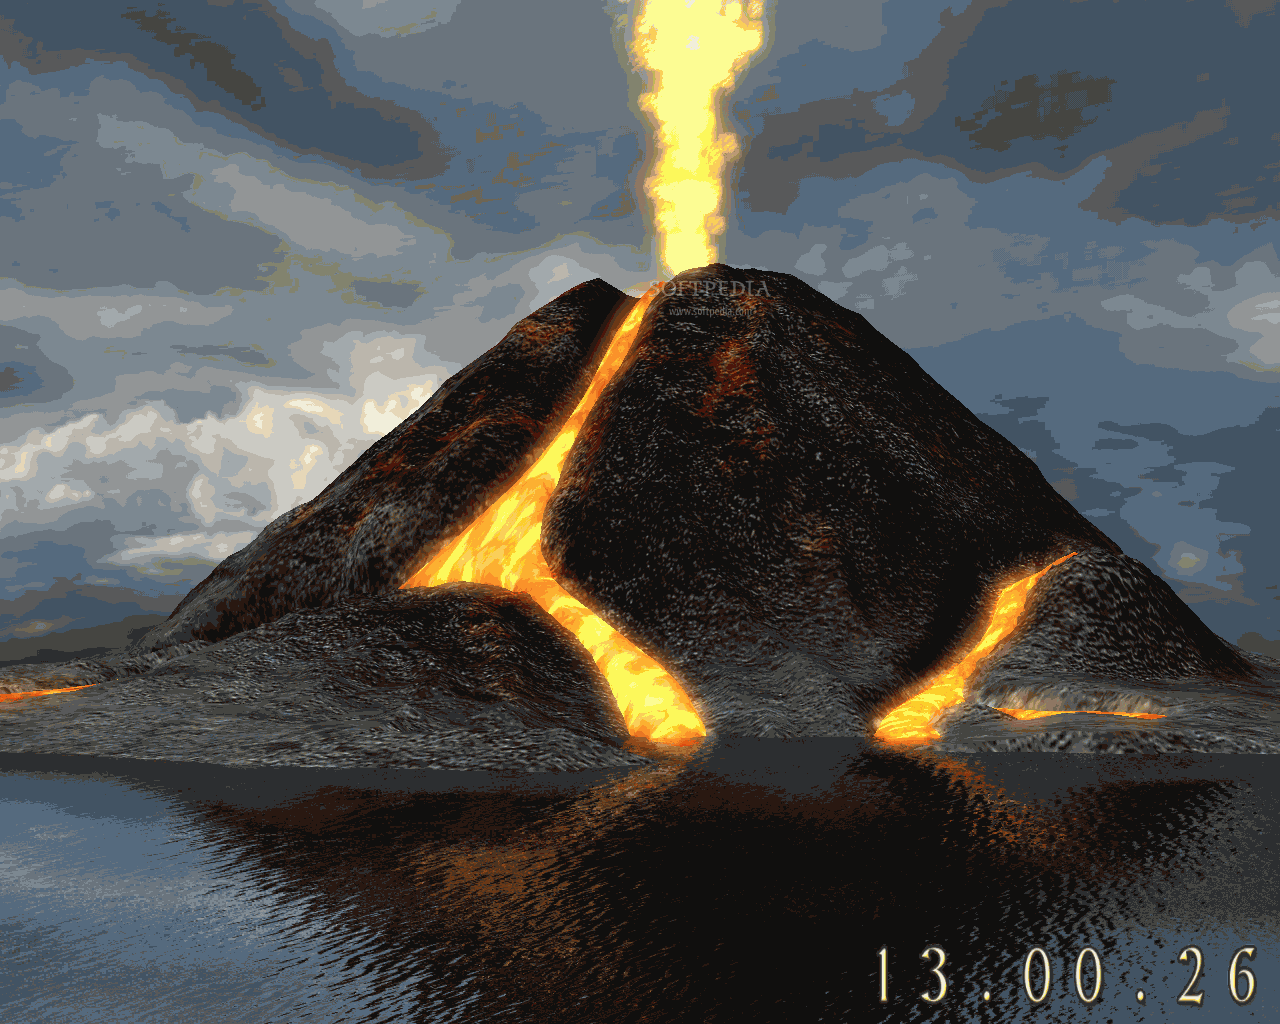 I made a volcano, thoughts? : Minecraft